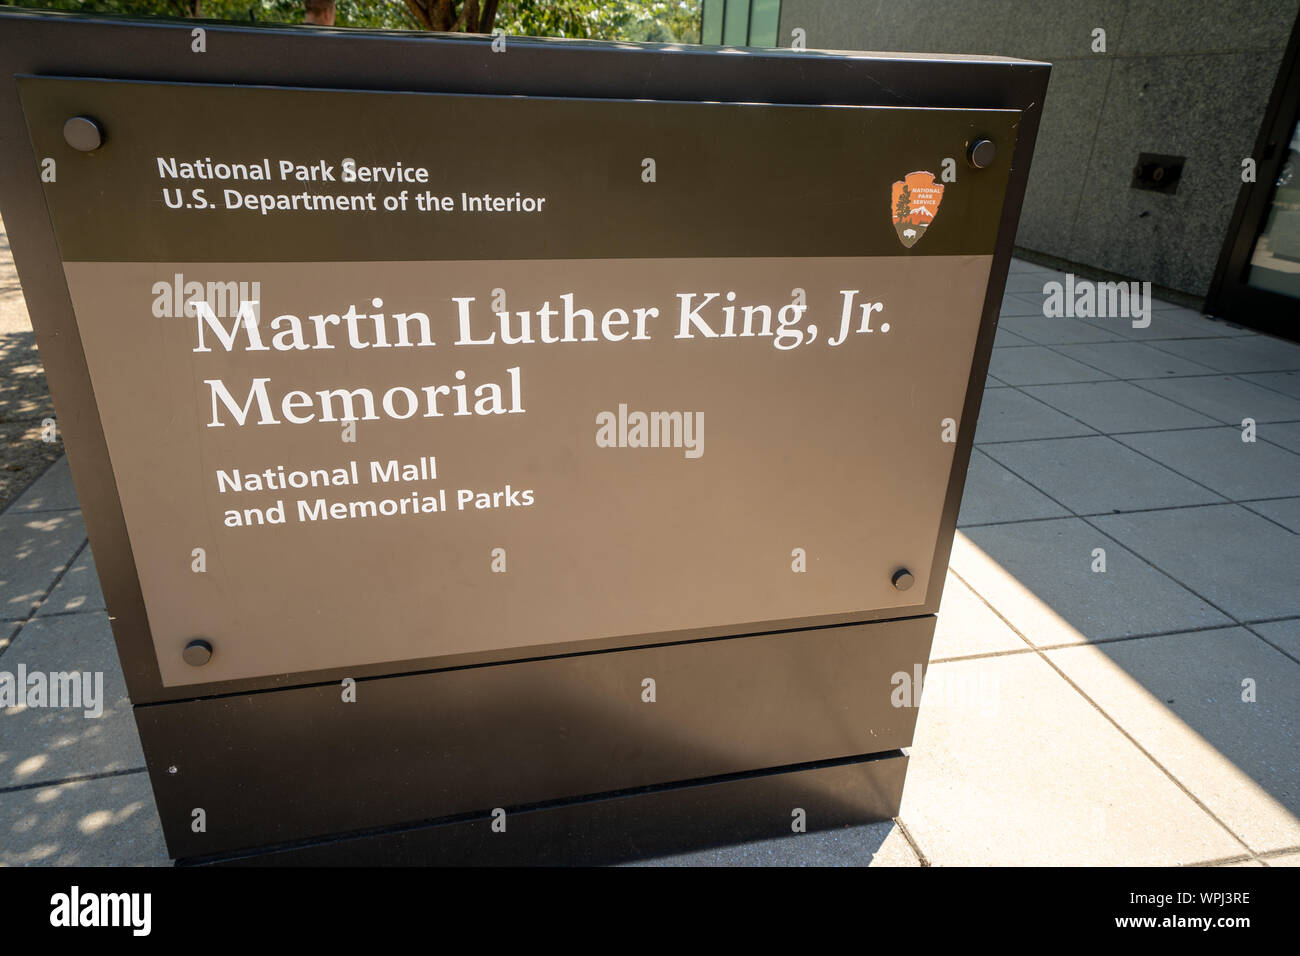 Washington, DC - August 6, 2019: National Park Service sign for the Martin Luther King Jr Memorial along the National Mall Stock Photo